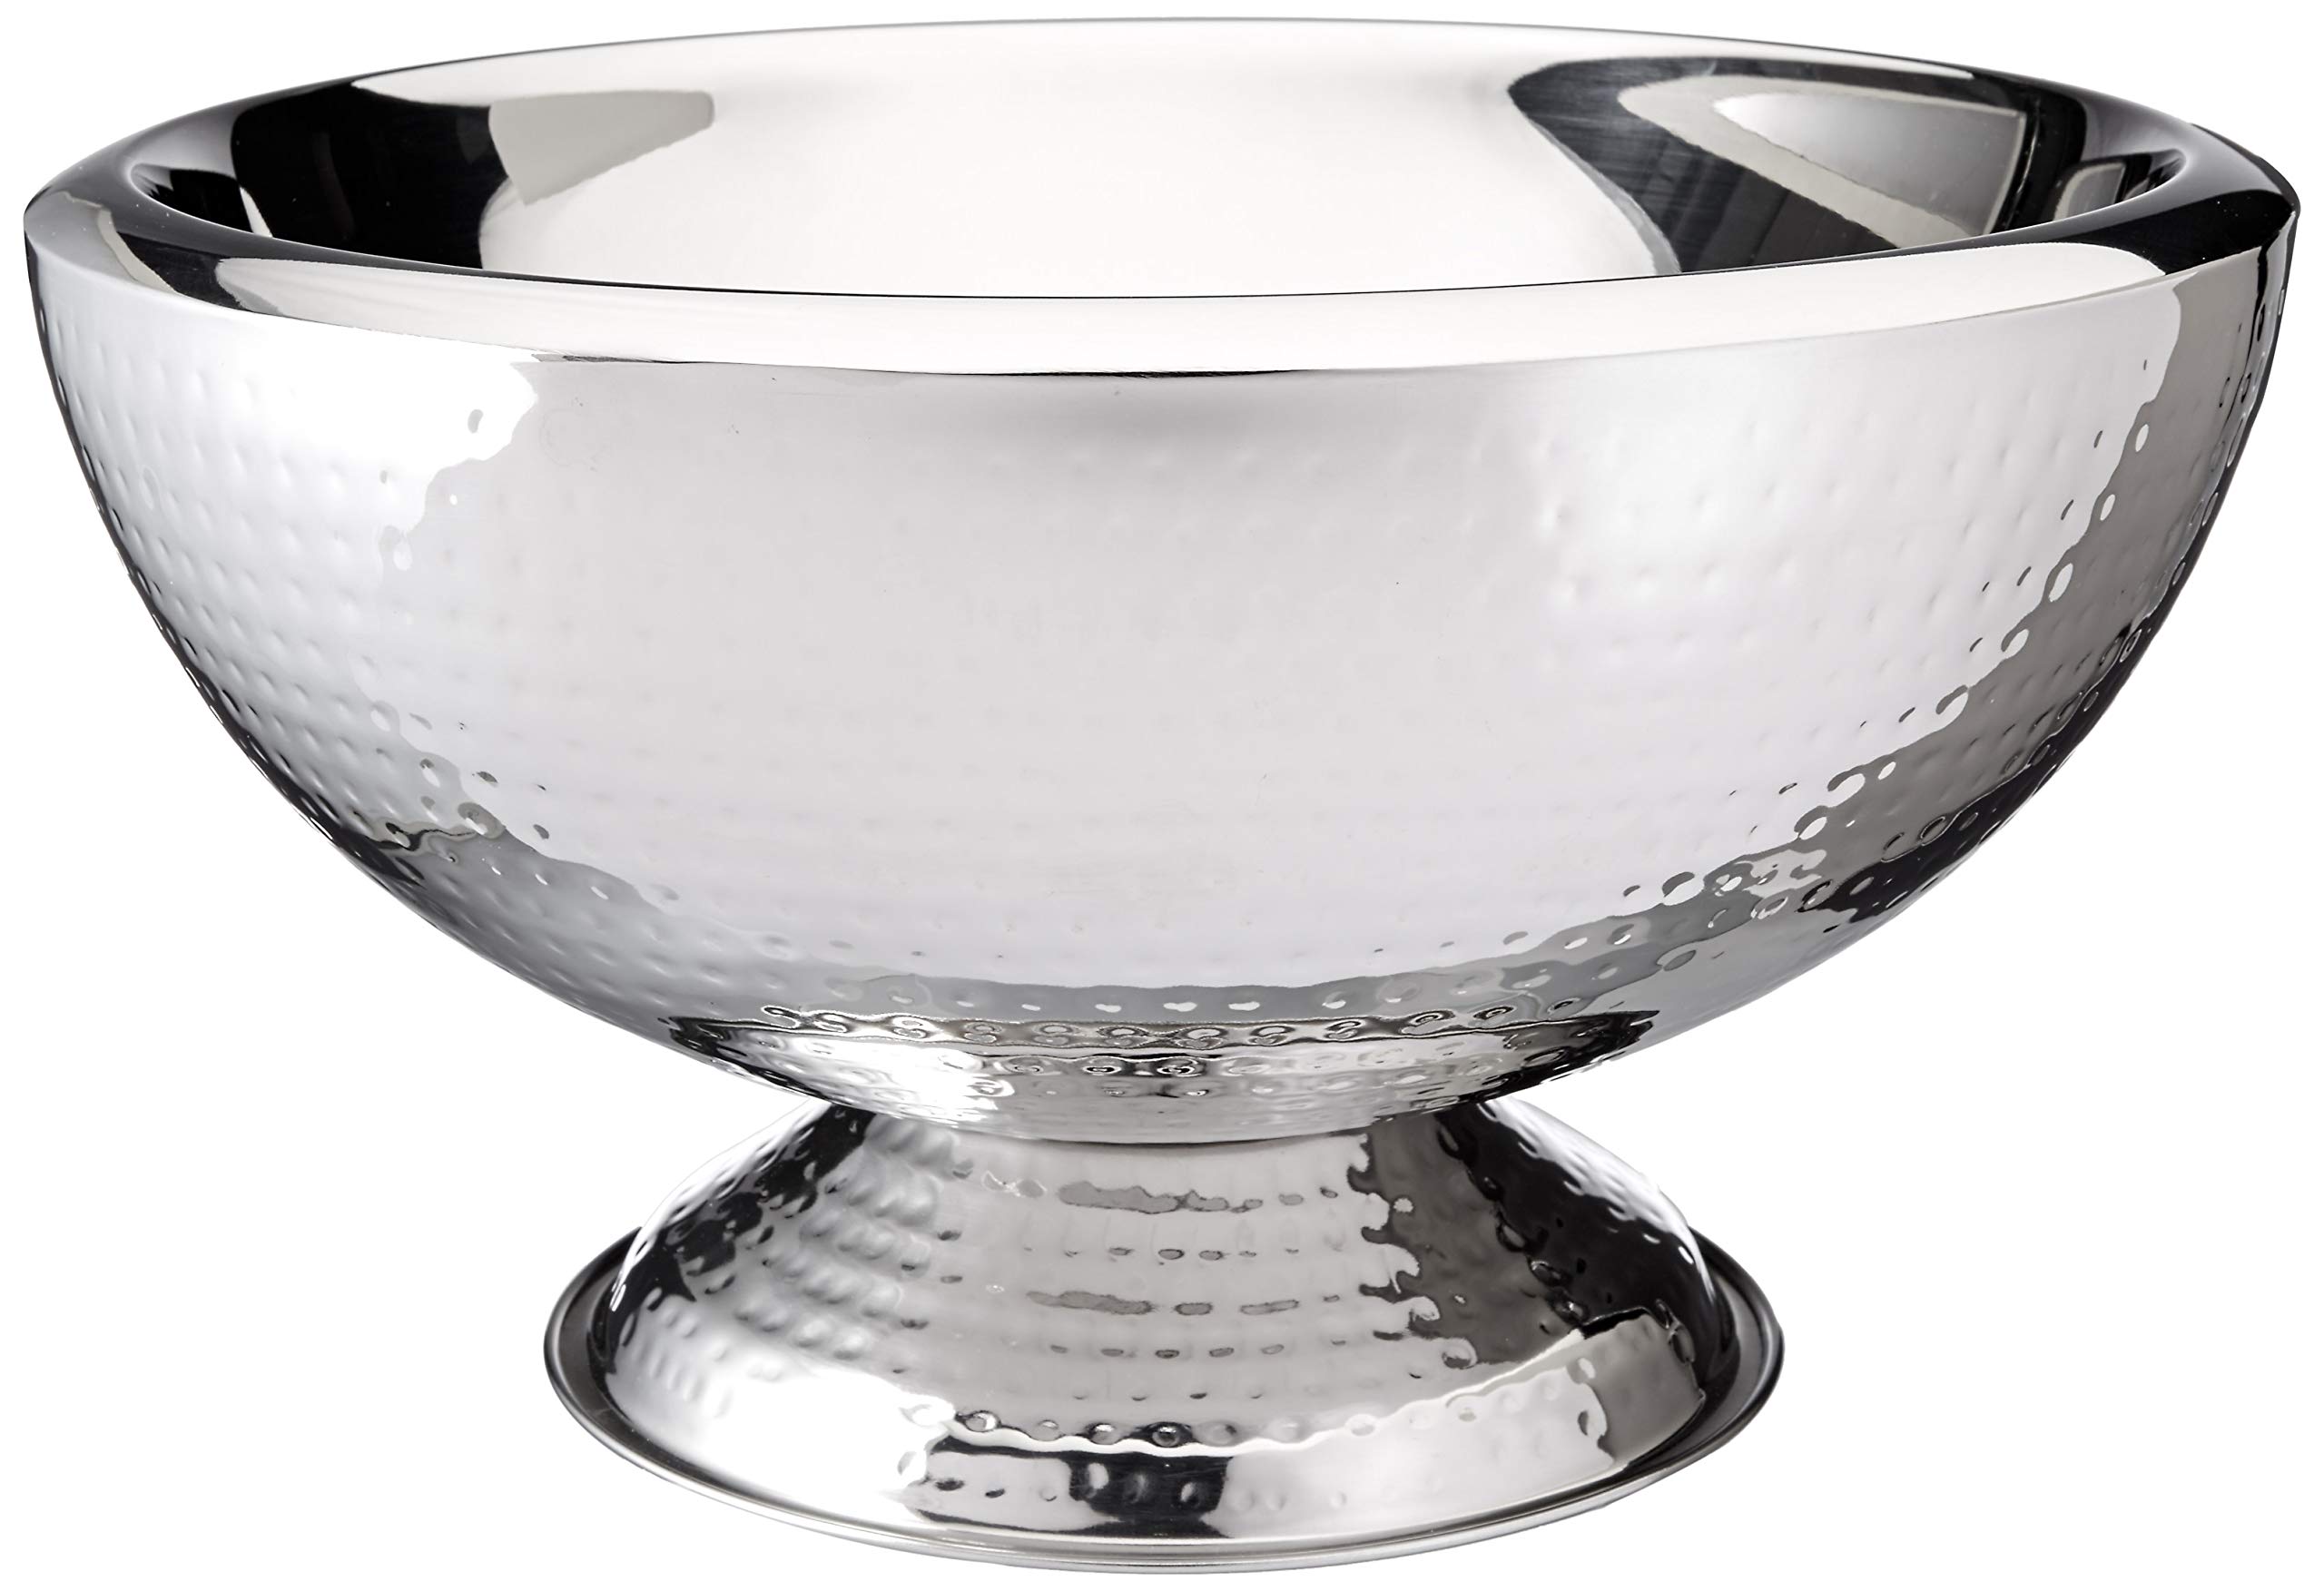 Elegant USA Elegance Hammered 3-Gallon Stainless Steel Doublewall Punch Bowl